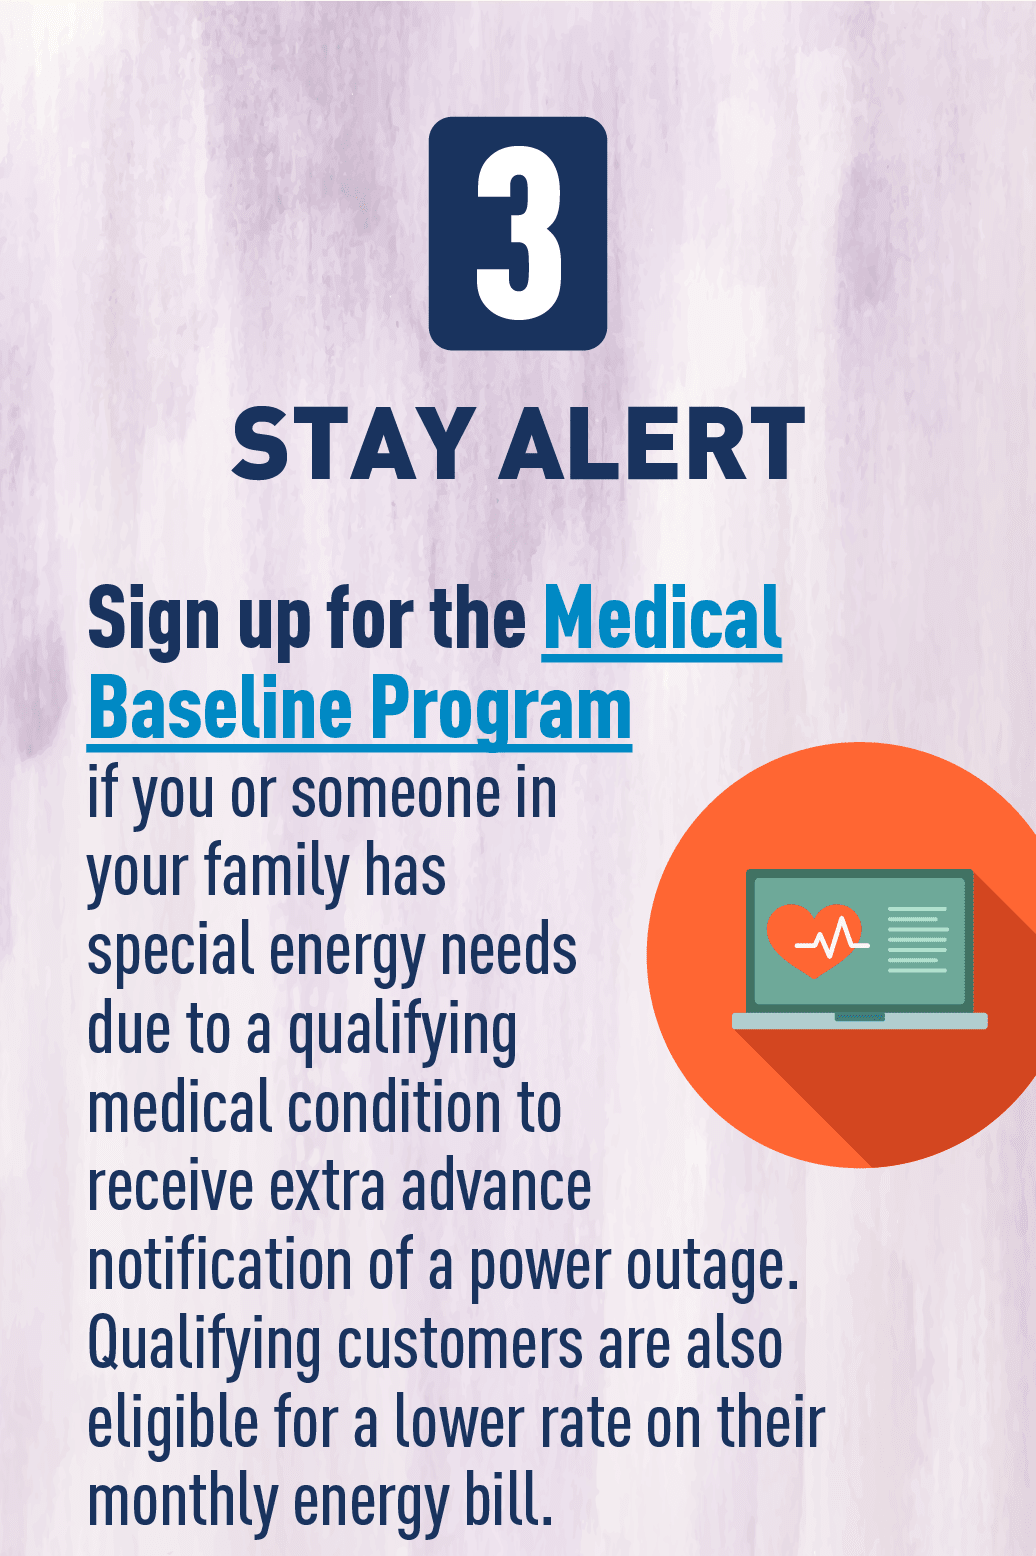 Image: Graphic of computer. Text: STAY ALERT Sign up for the Medical Baseline Program if you or someone in your family has special energy needs M due to a qualifying medical condition to receive extra advance notification of a power outage. Qualifying customers are also eligible for a lower rate on their monthly energy bill.